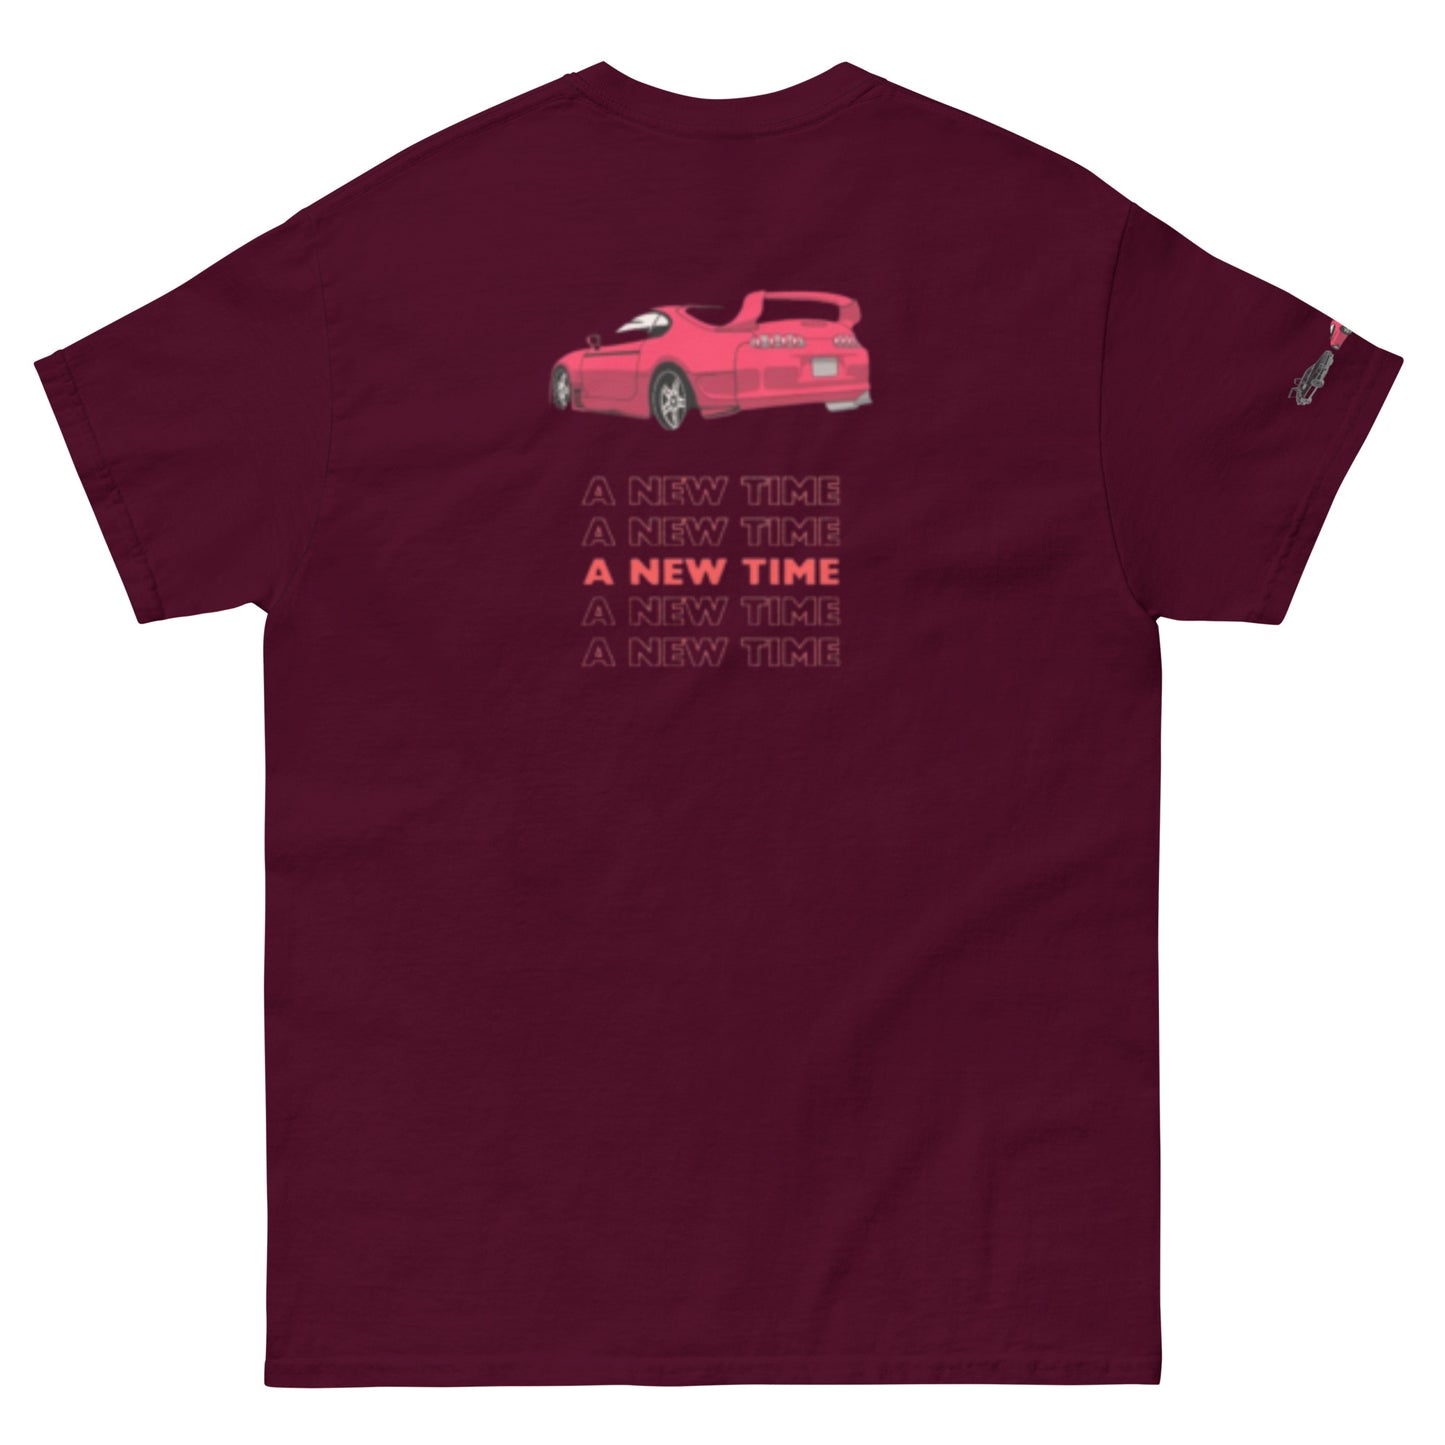 Supra T-shirt (Part of Deluxe Cars Collection)